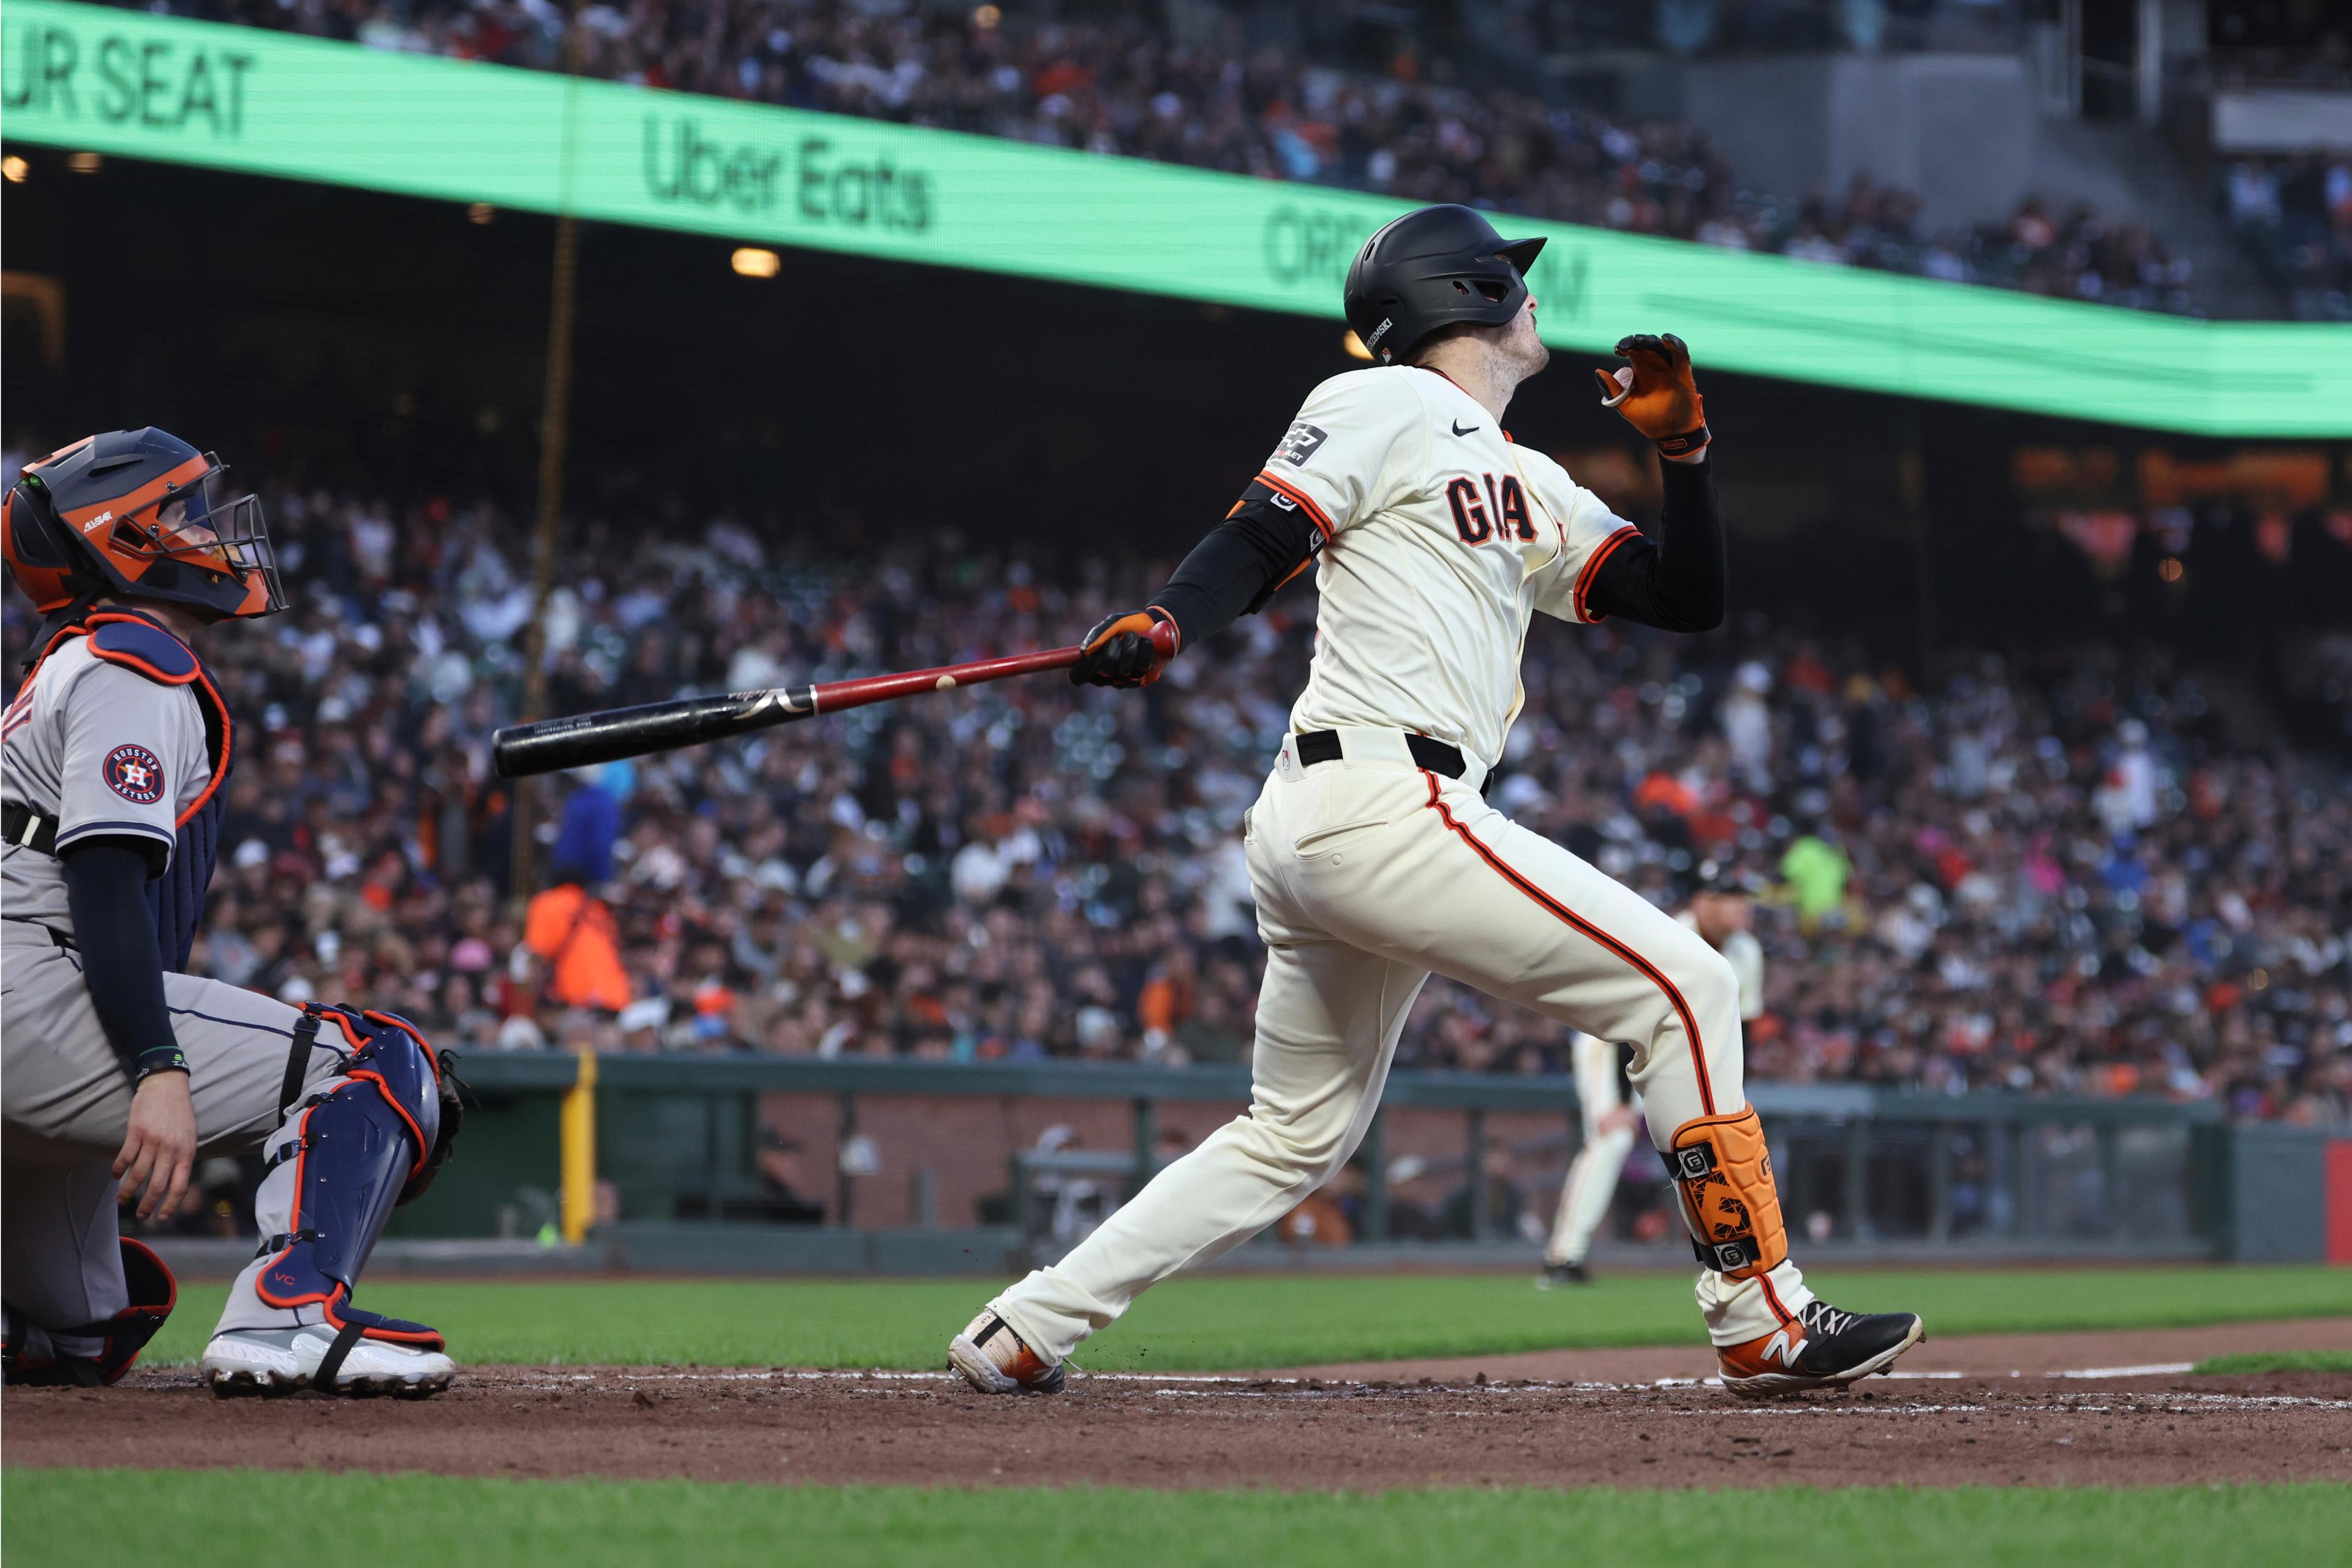 Big 10th-Inning Hit From Slater Gives Giants Come-From-Behind Win Over Astros